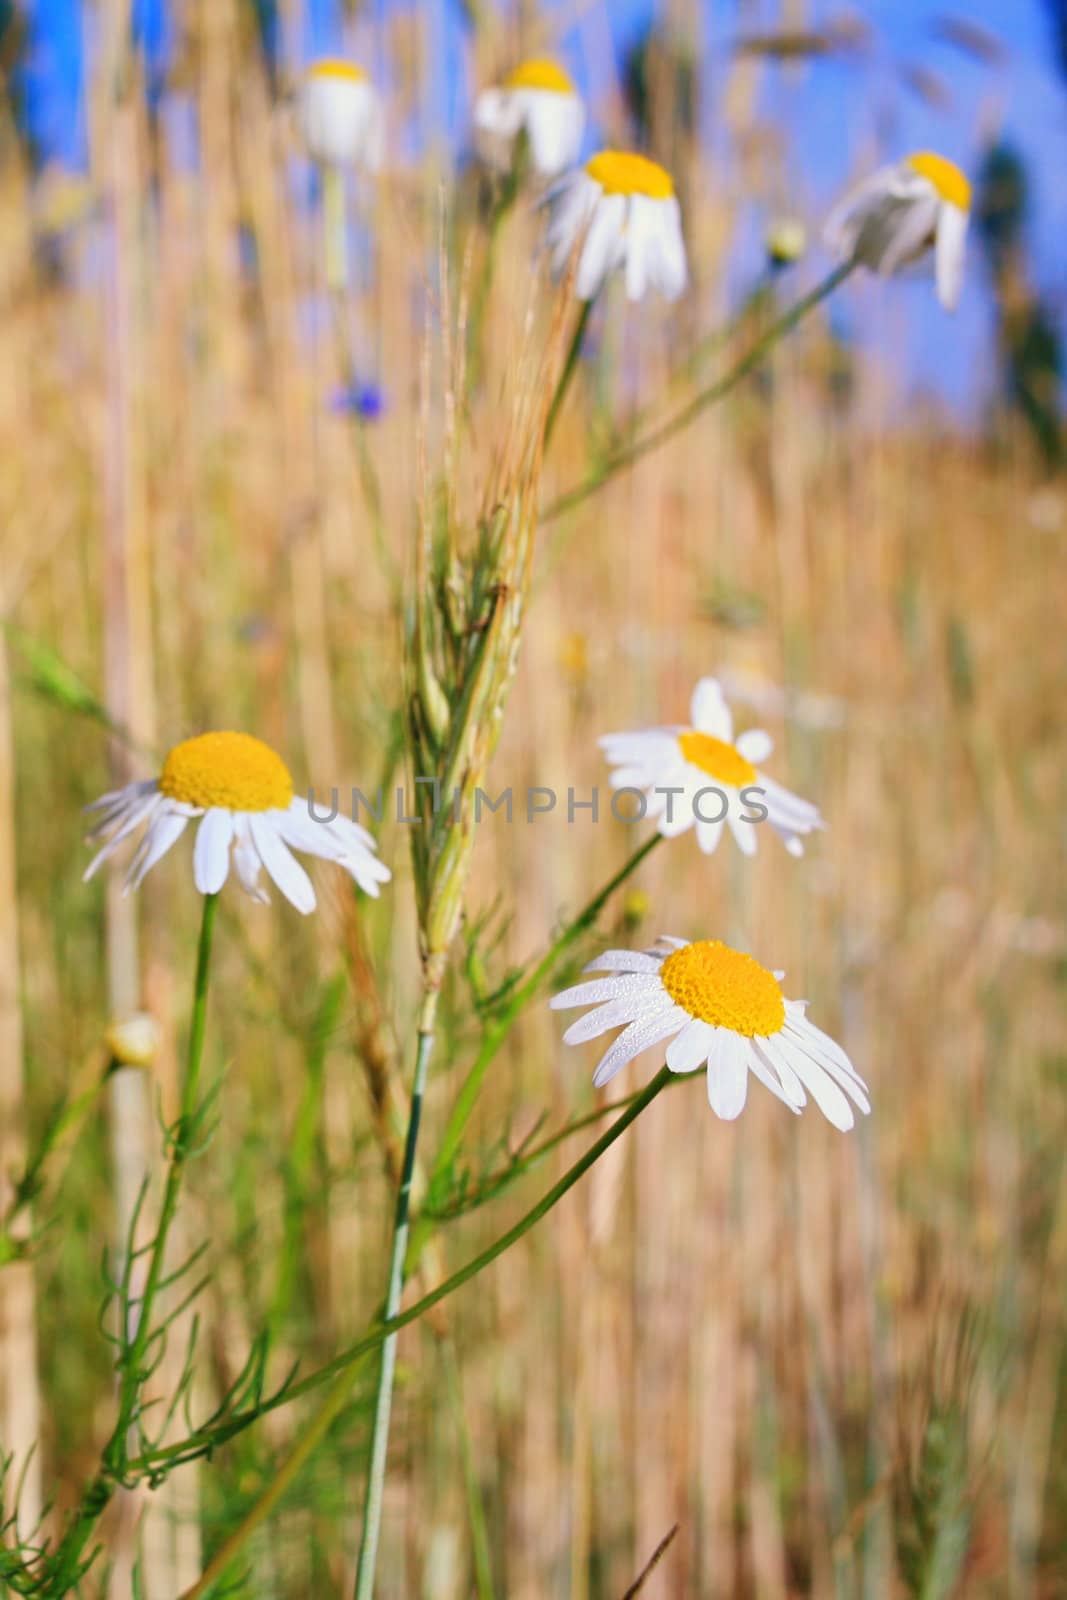 An image of field with white daisy